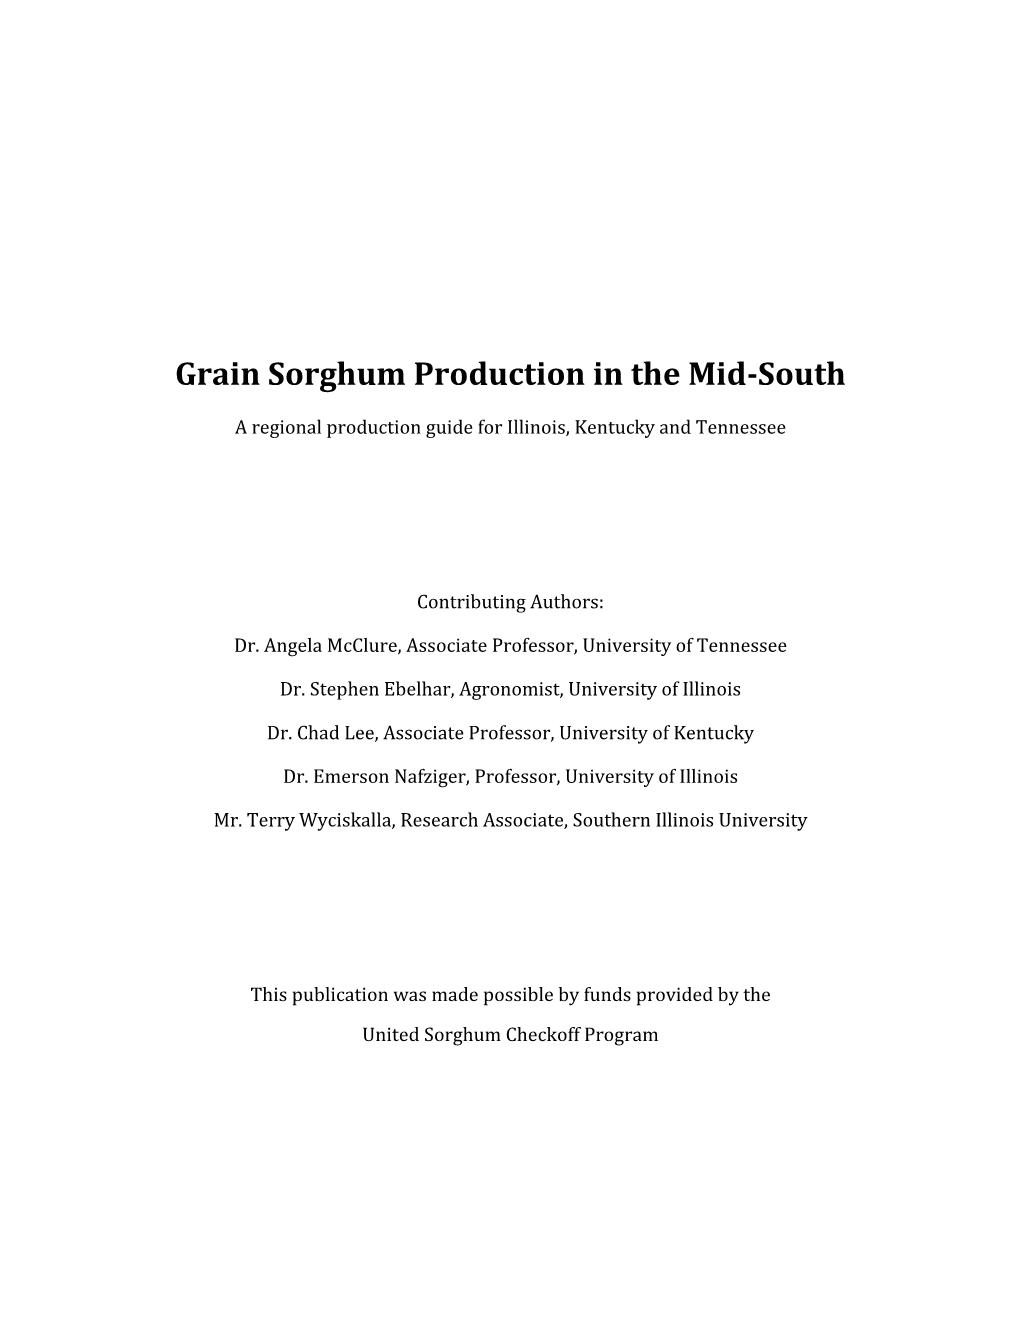 Grain Sorghum Production in the Mid-South